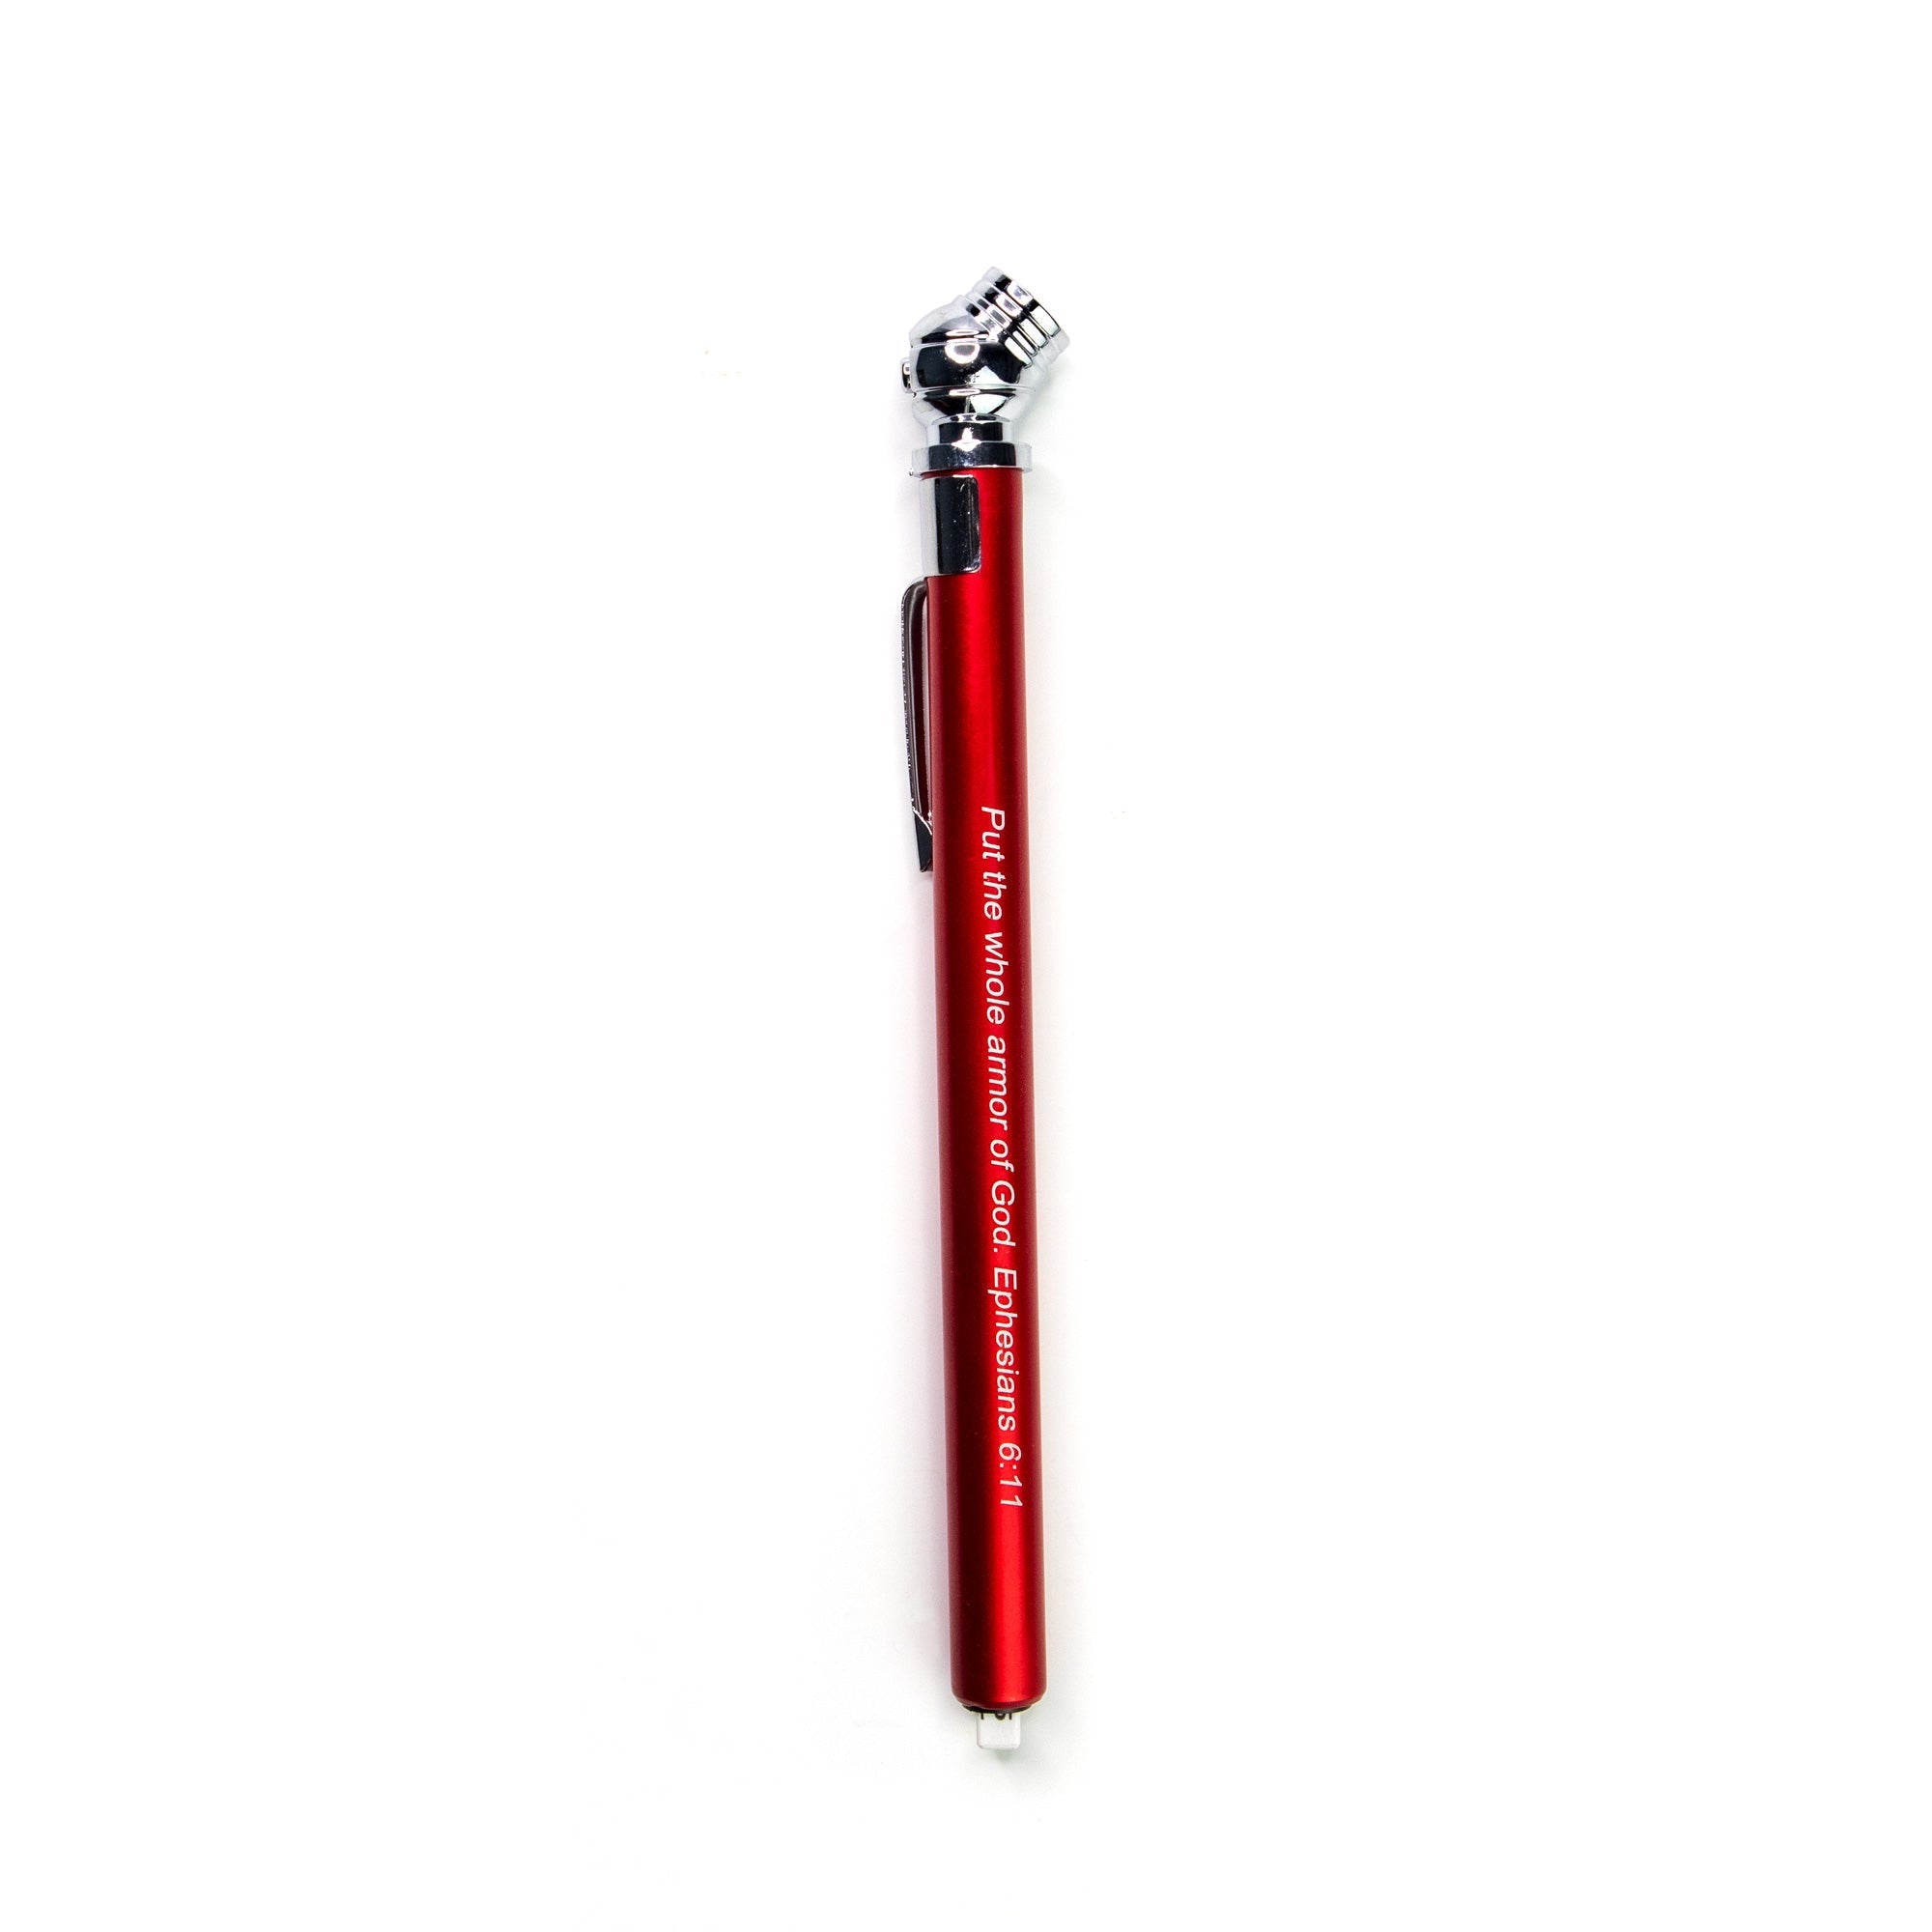 Armor of God Tire Pressure Gauge with Bookmark - Red